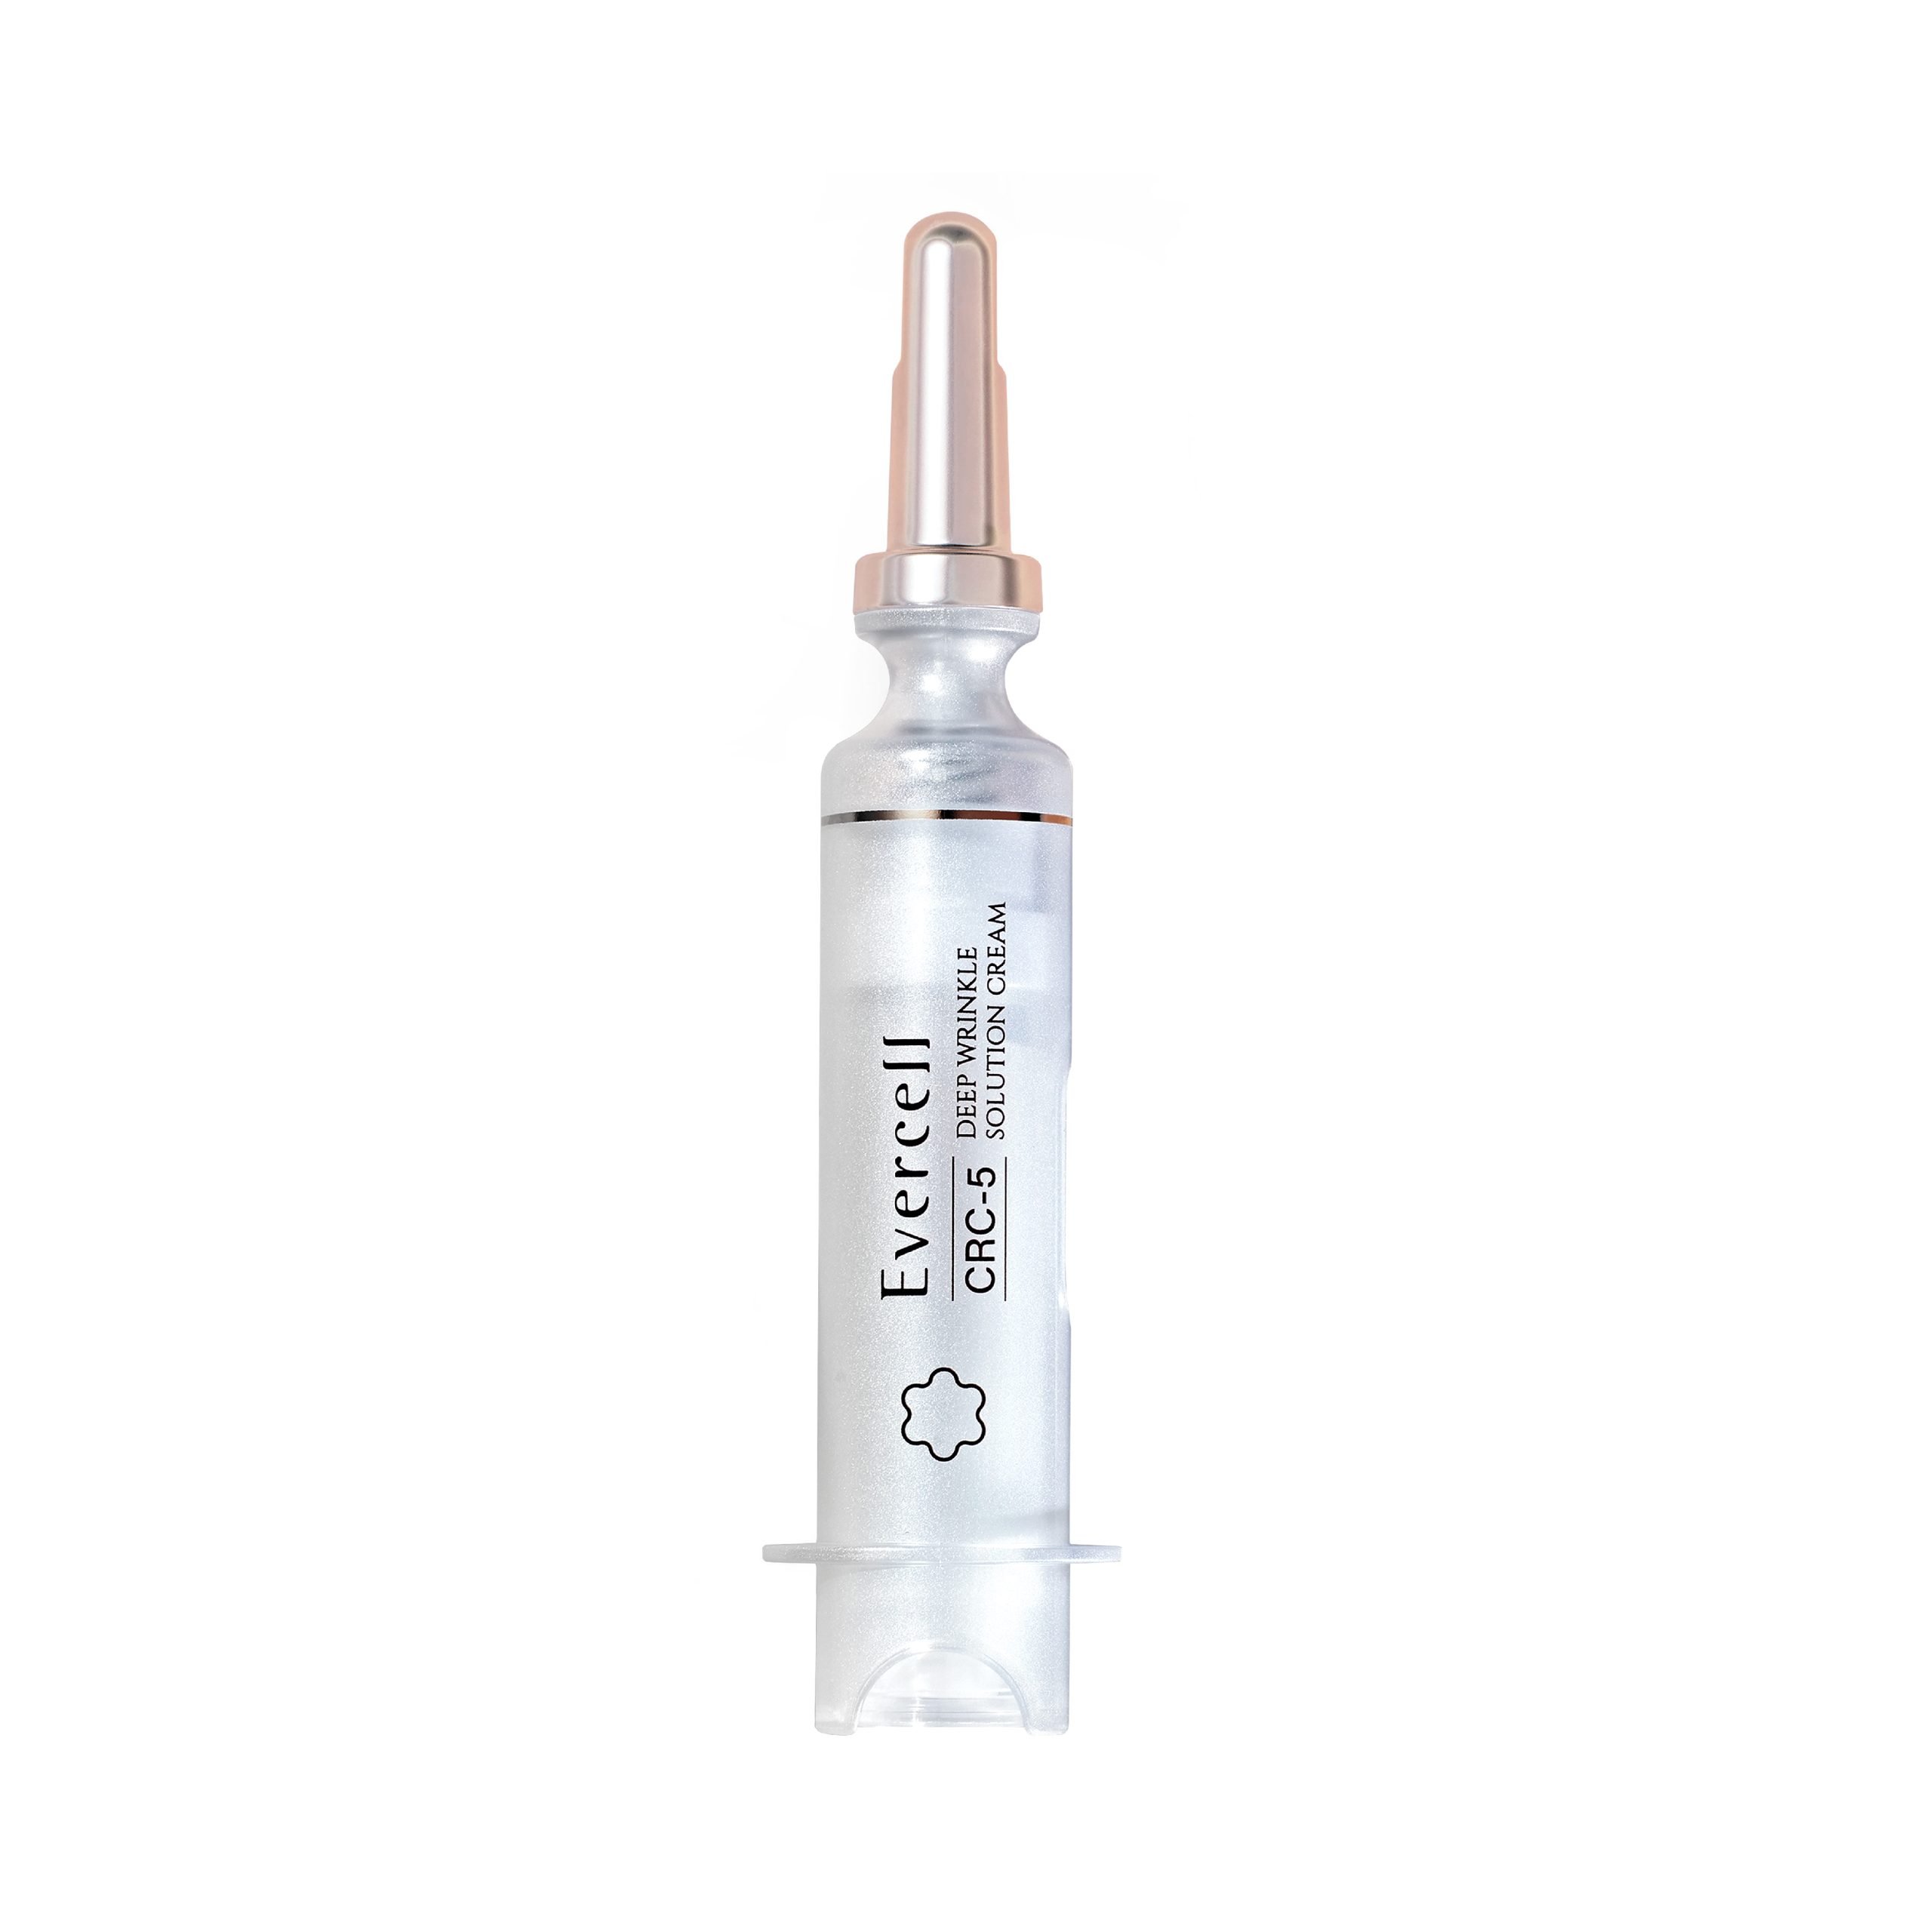 Evecell Deep Wrinkle Solution Nozzle Type 10ml